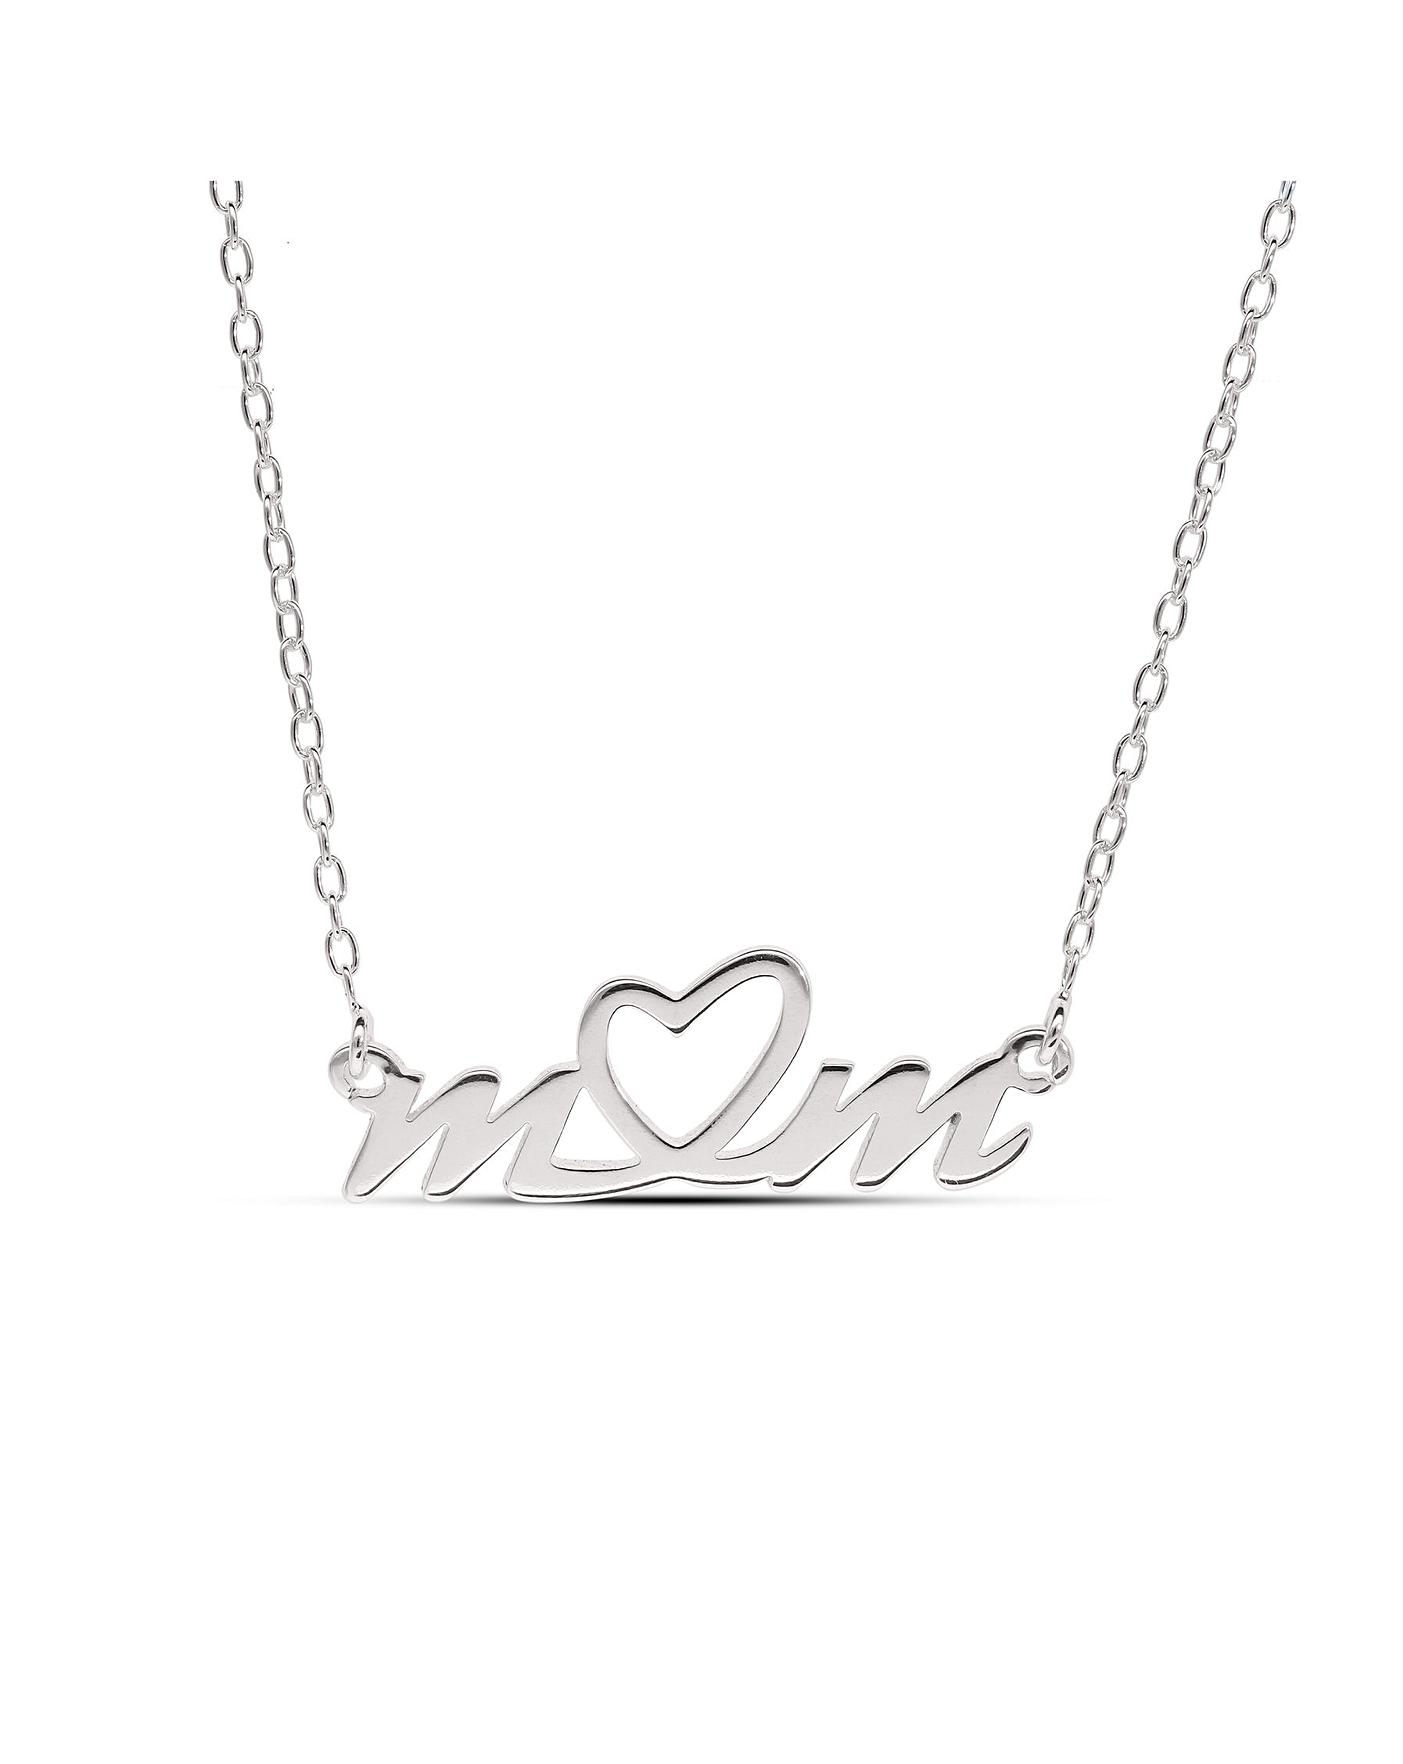 Buy rakva 925 Sterling Silver Gift Mom Necklace, Mum Retirement Necklace  Gift, Retirement Gift For Mum, Gift For Retiring Mother at Amazon.in